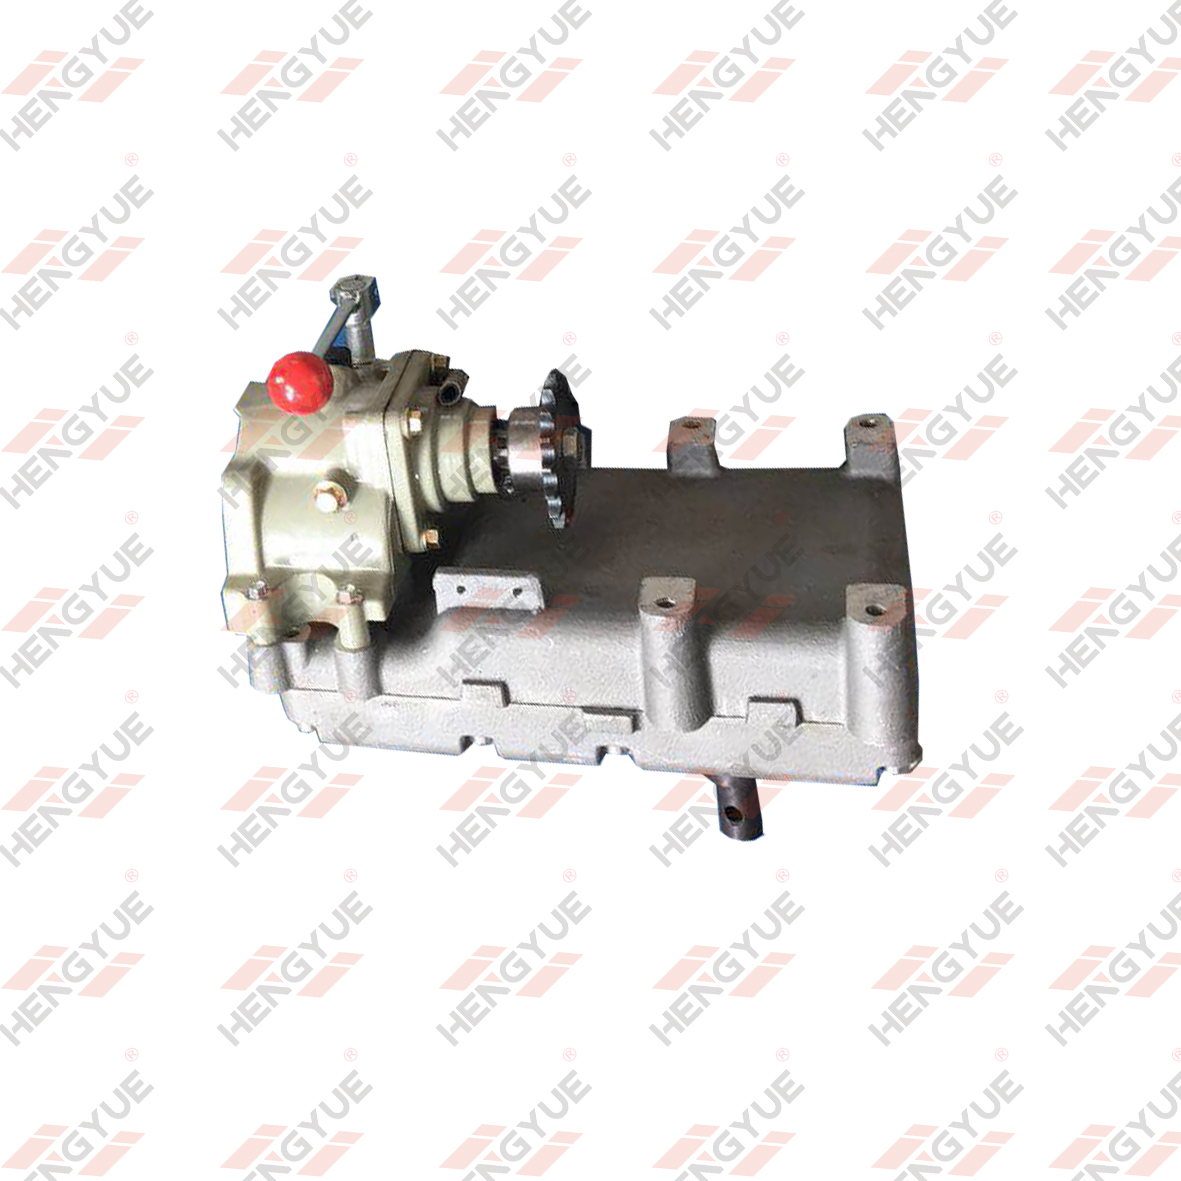 Gear box for The horizontal axis 4 stroke engine power earth auger machine 